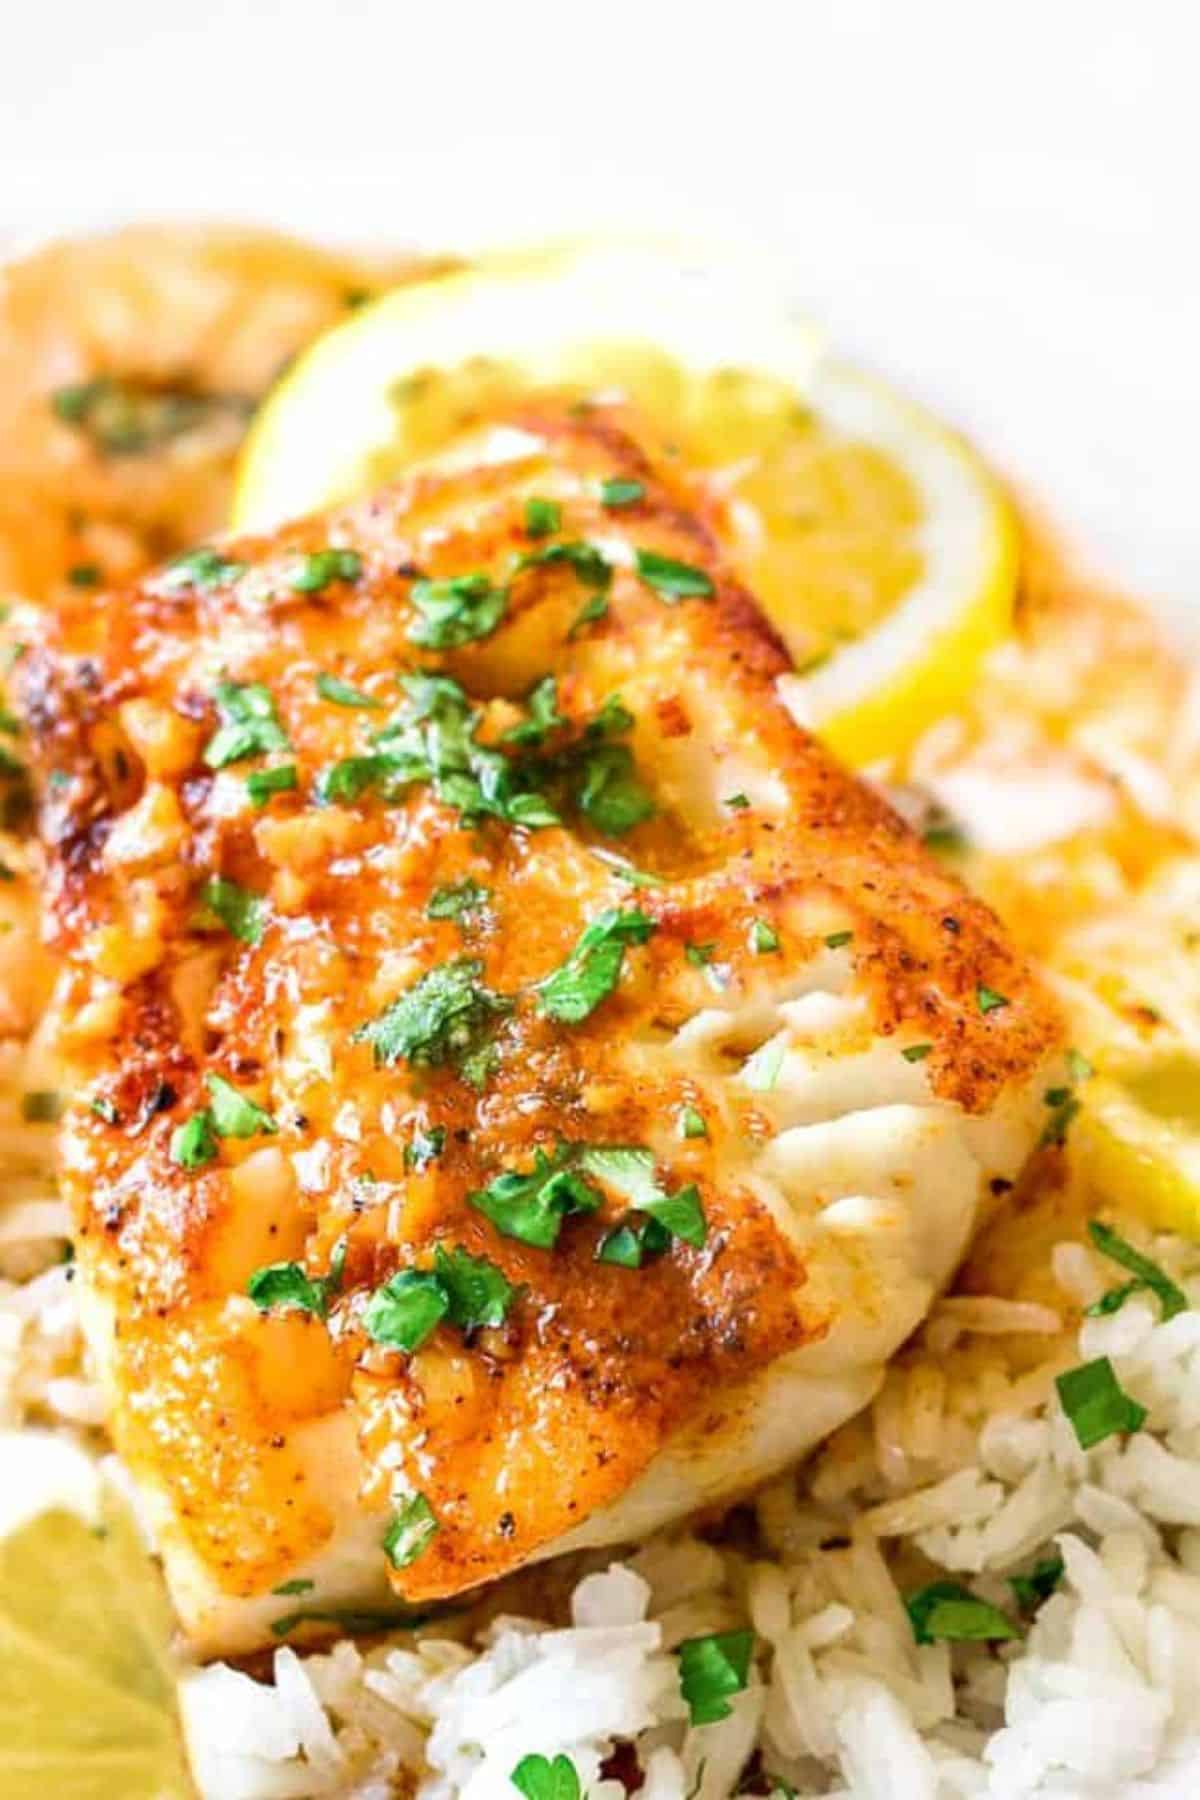 Simple garlic butter cod filets with rice.